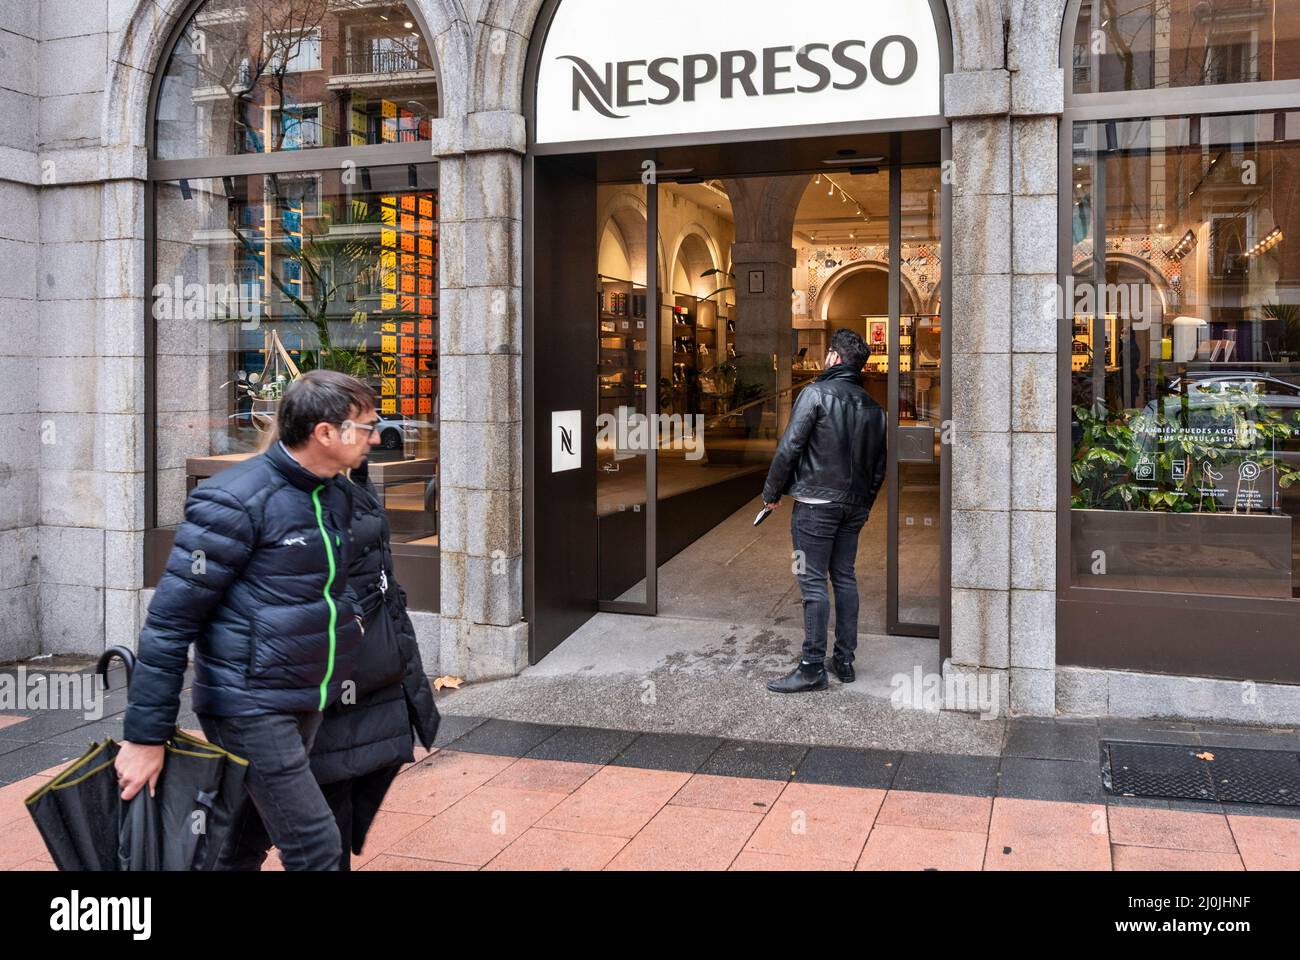 Nespresso Store In High Resolution Stock Photography and Images - Alamy